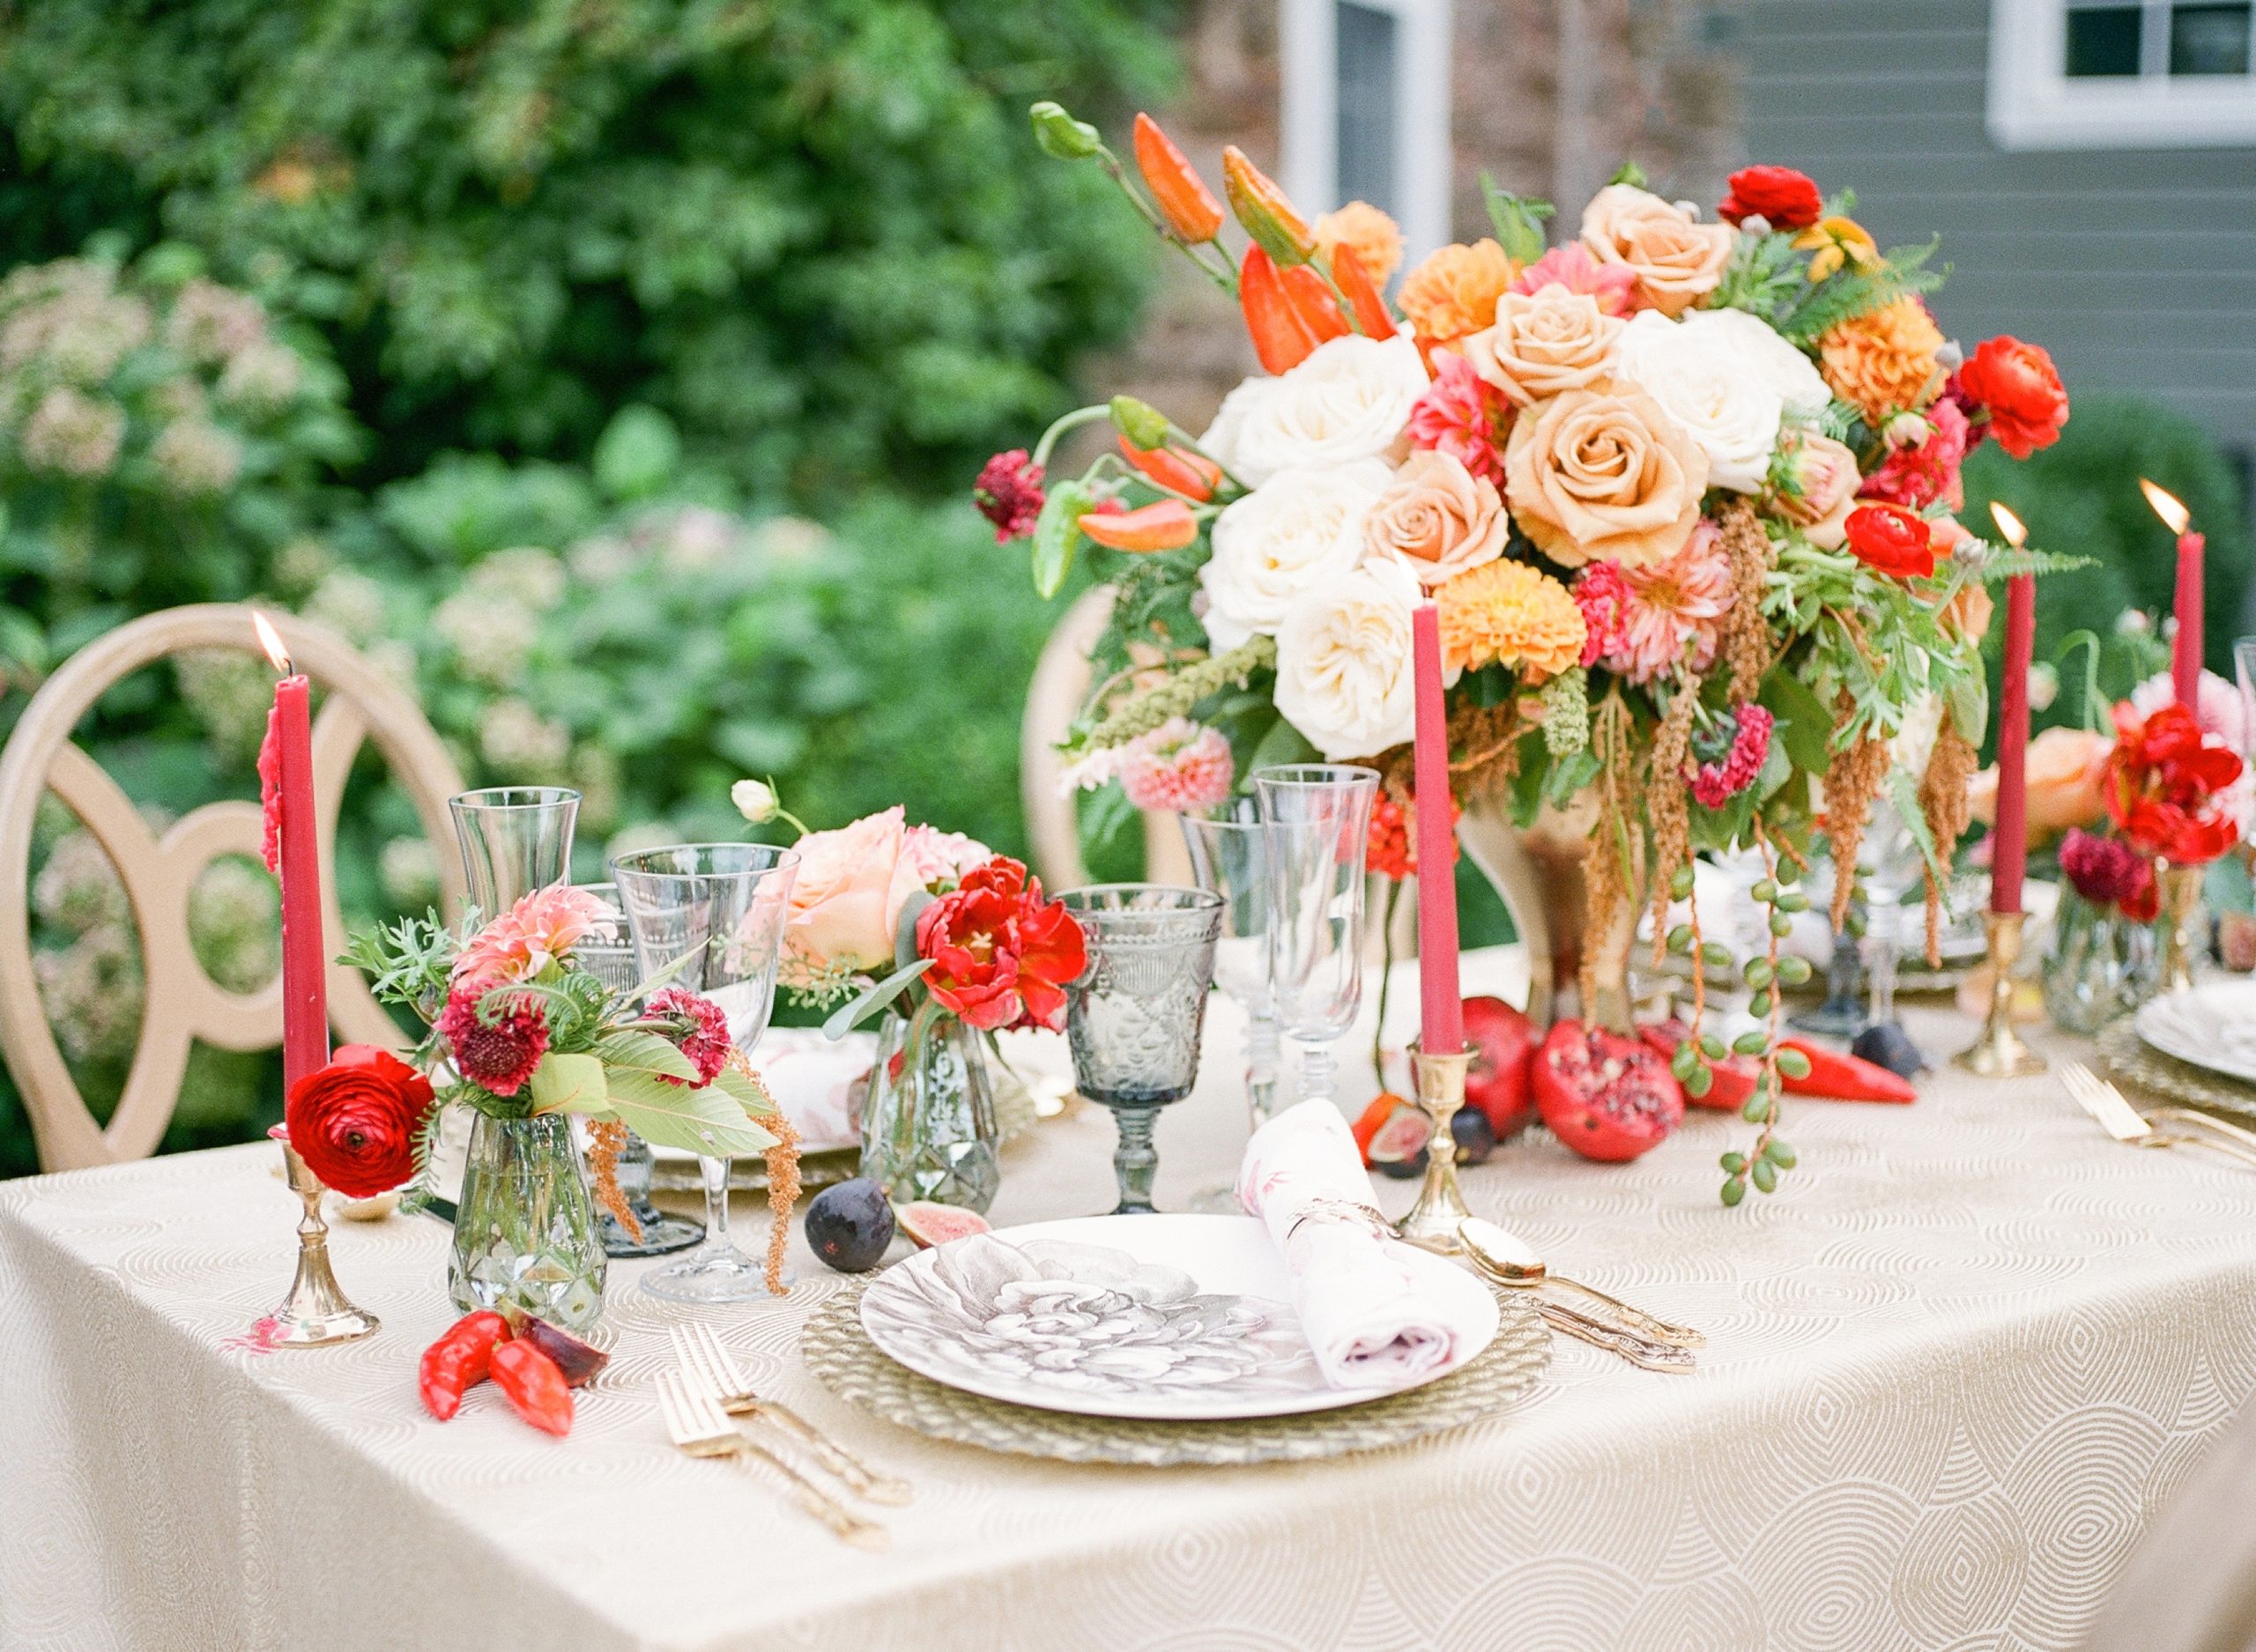 Washington, DC wedding photographer, Alicia Lacey captures this stunning harvest gathering inspired wedding decor from SRS Events.